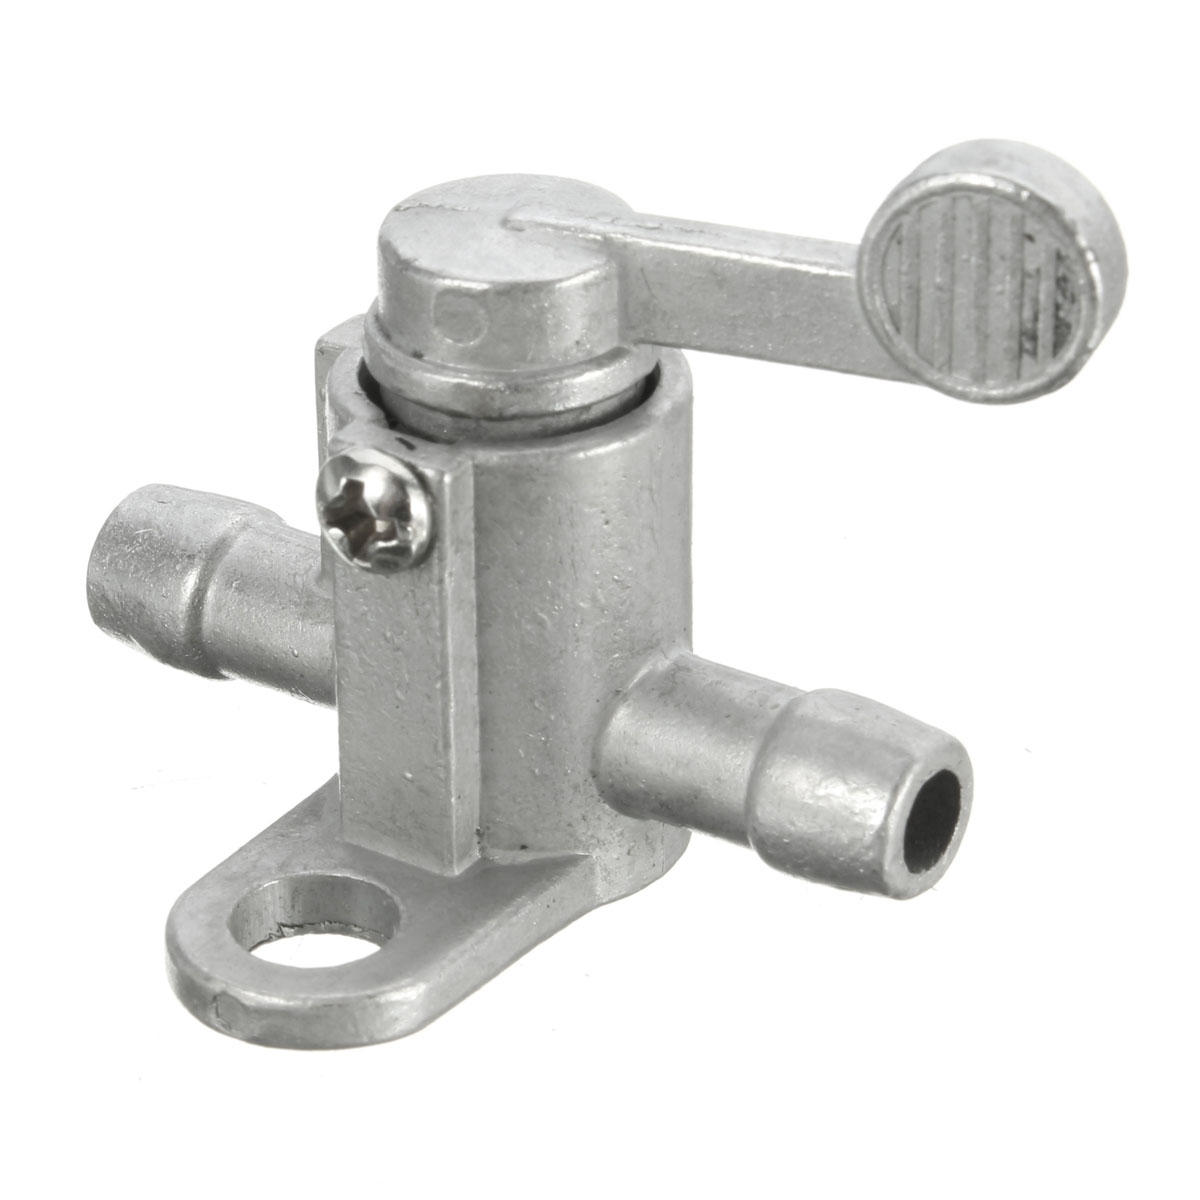 8mm Inline Fuel Tank Tap On/Off Petcock Switch For Quad Buggy Dirt Bike